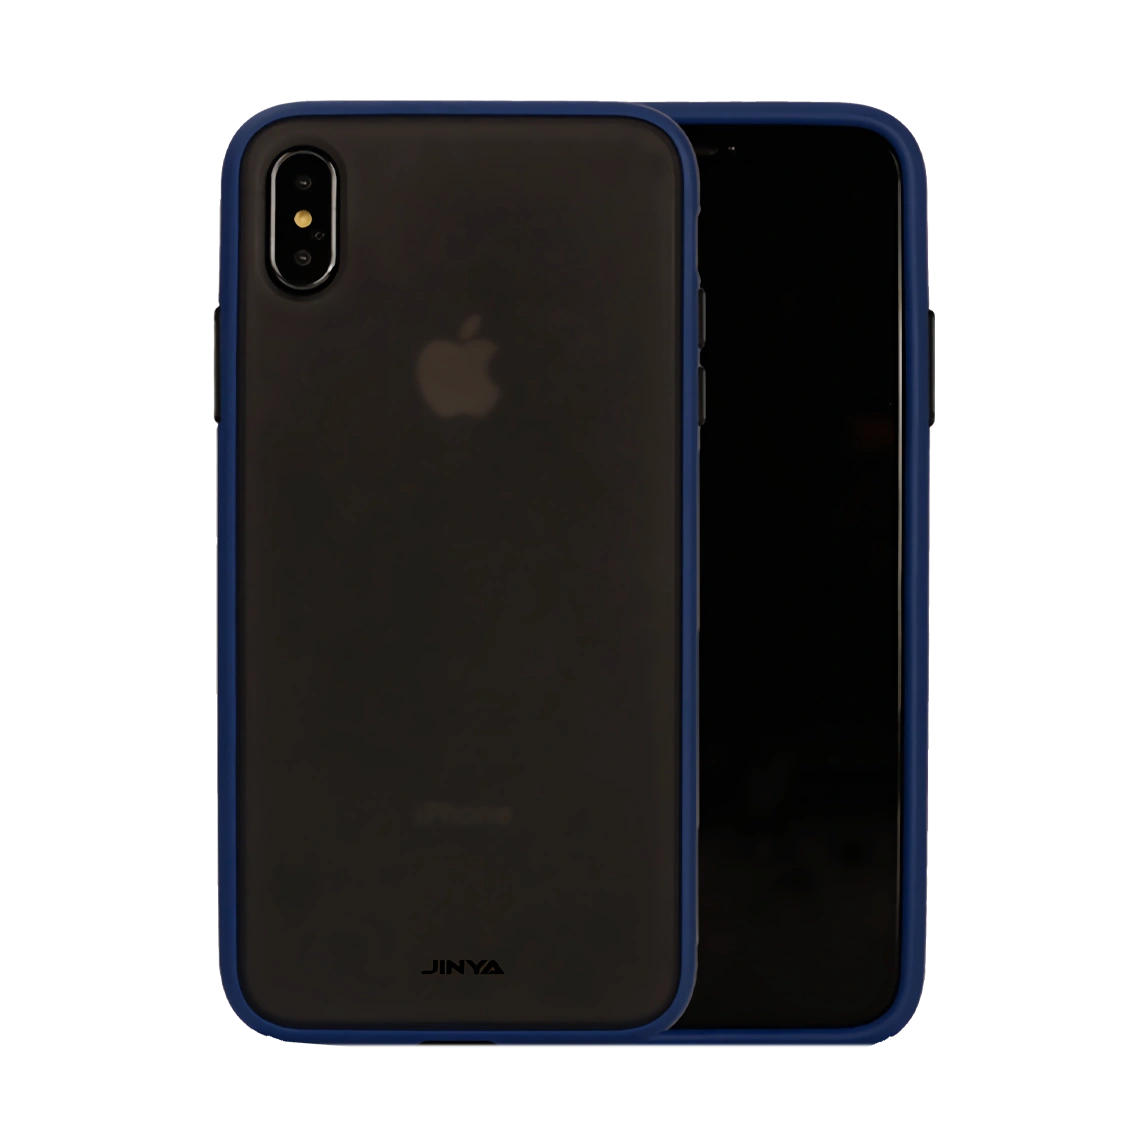 jinya-sandy-pro-case-for-iphone-xs-max